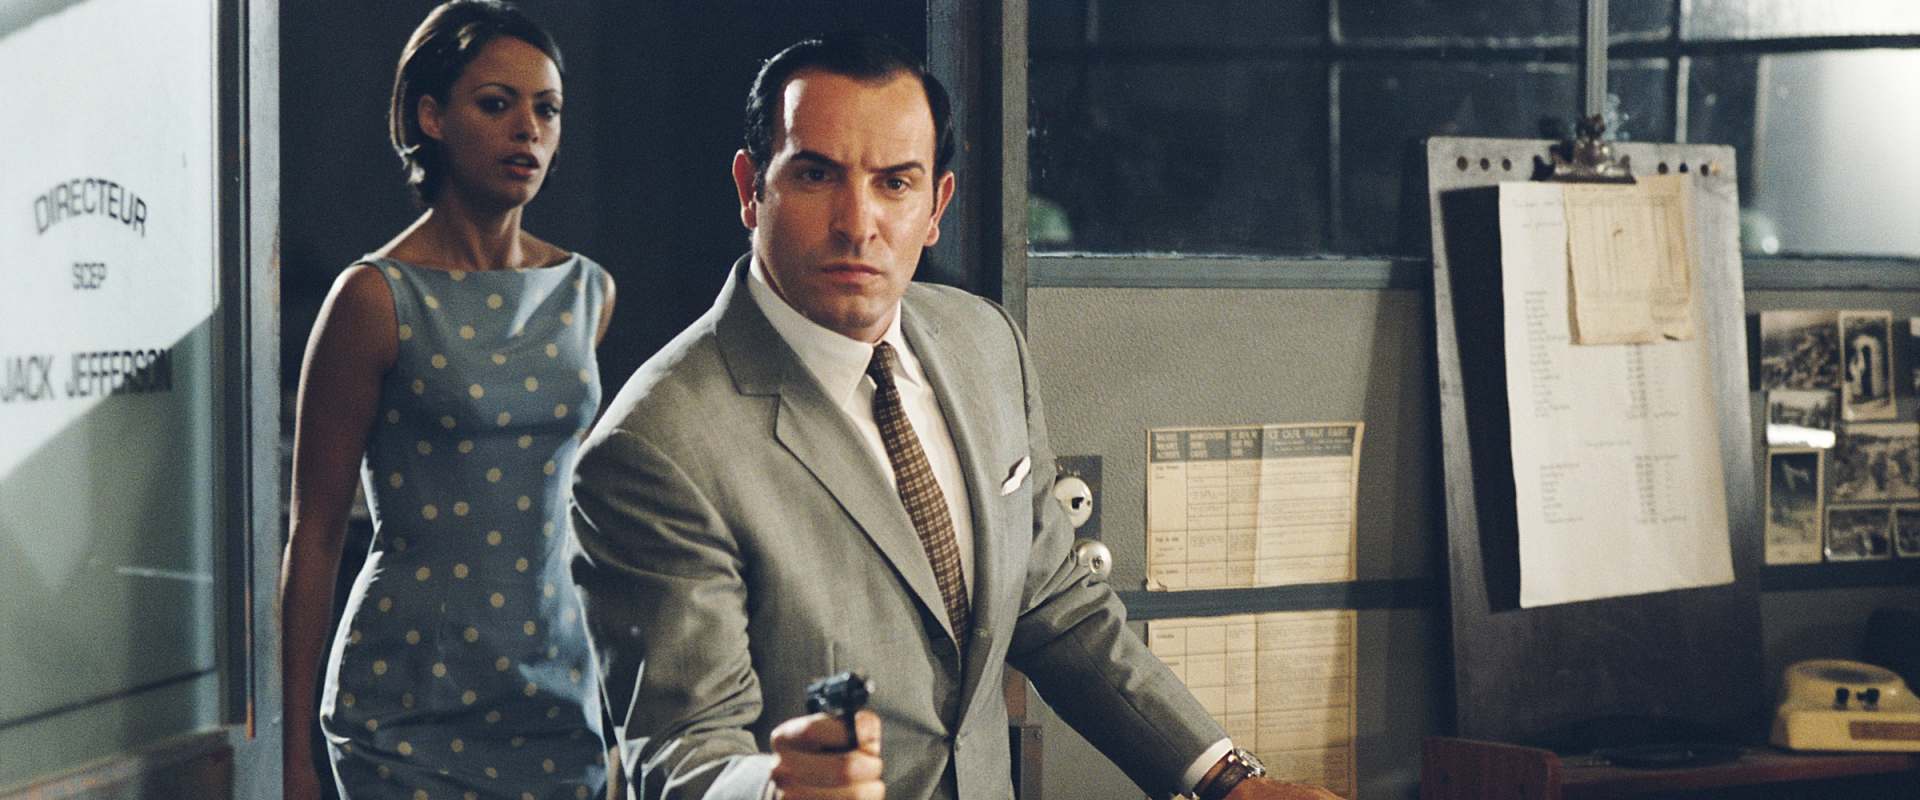 OSS 117: Cairo, Nest of Spies background 2